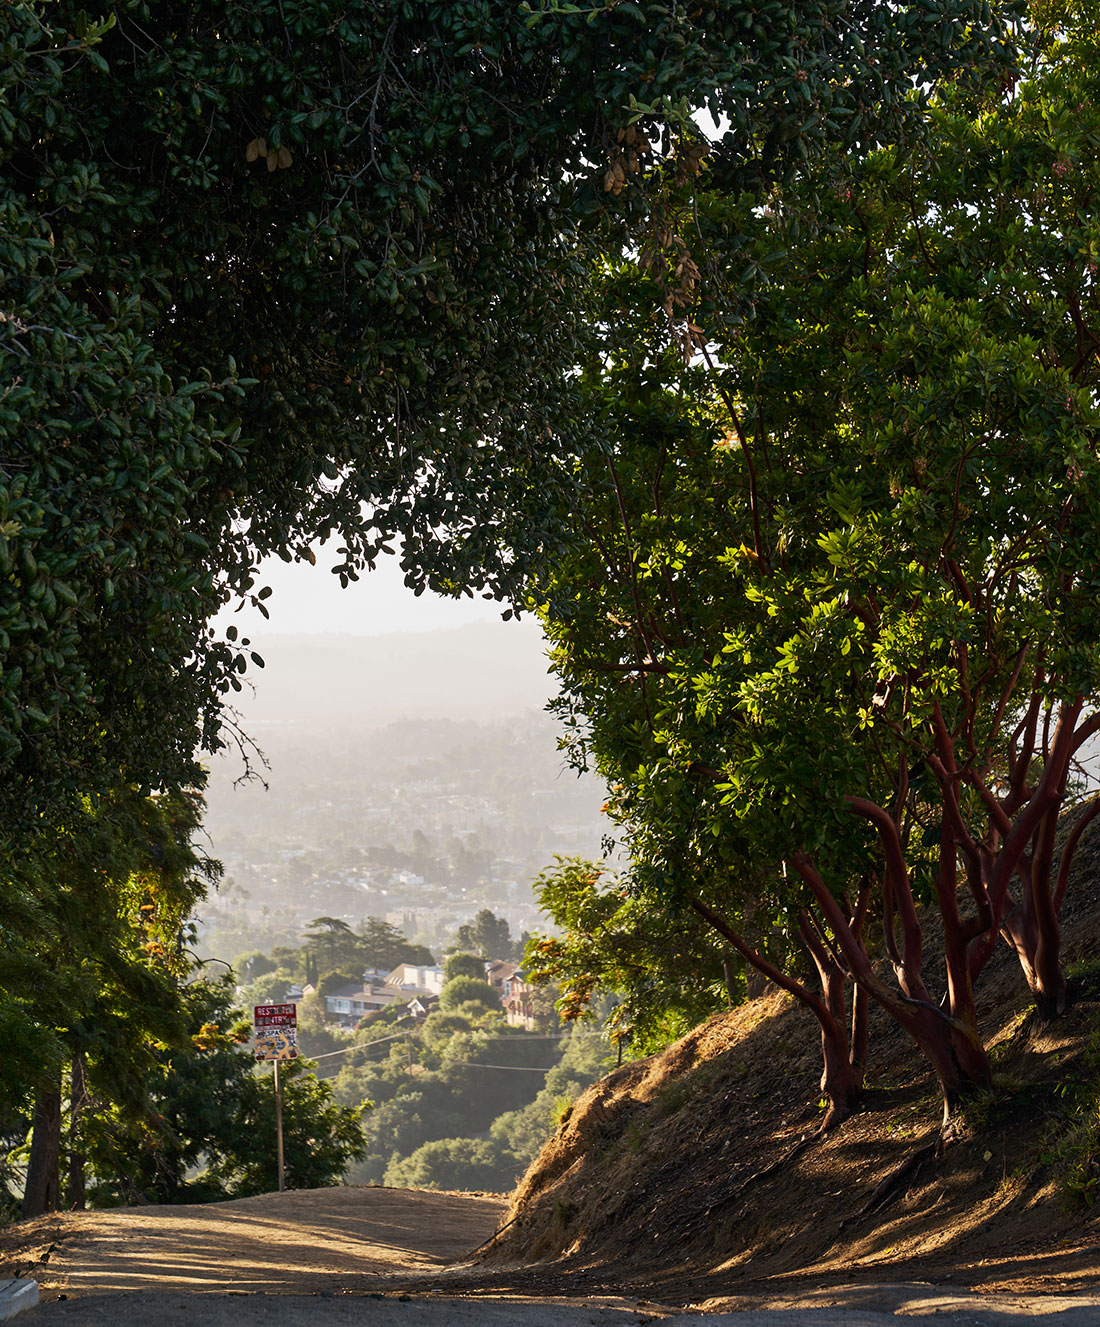 A sunlit path with dense trees on either side leads to a scenic overlook of a city. The trees create a natural archway, framing a view of houses and a hazy, distant cityscape below, partially illuminated by the setting sun.